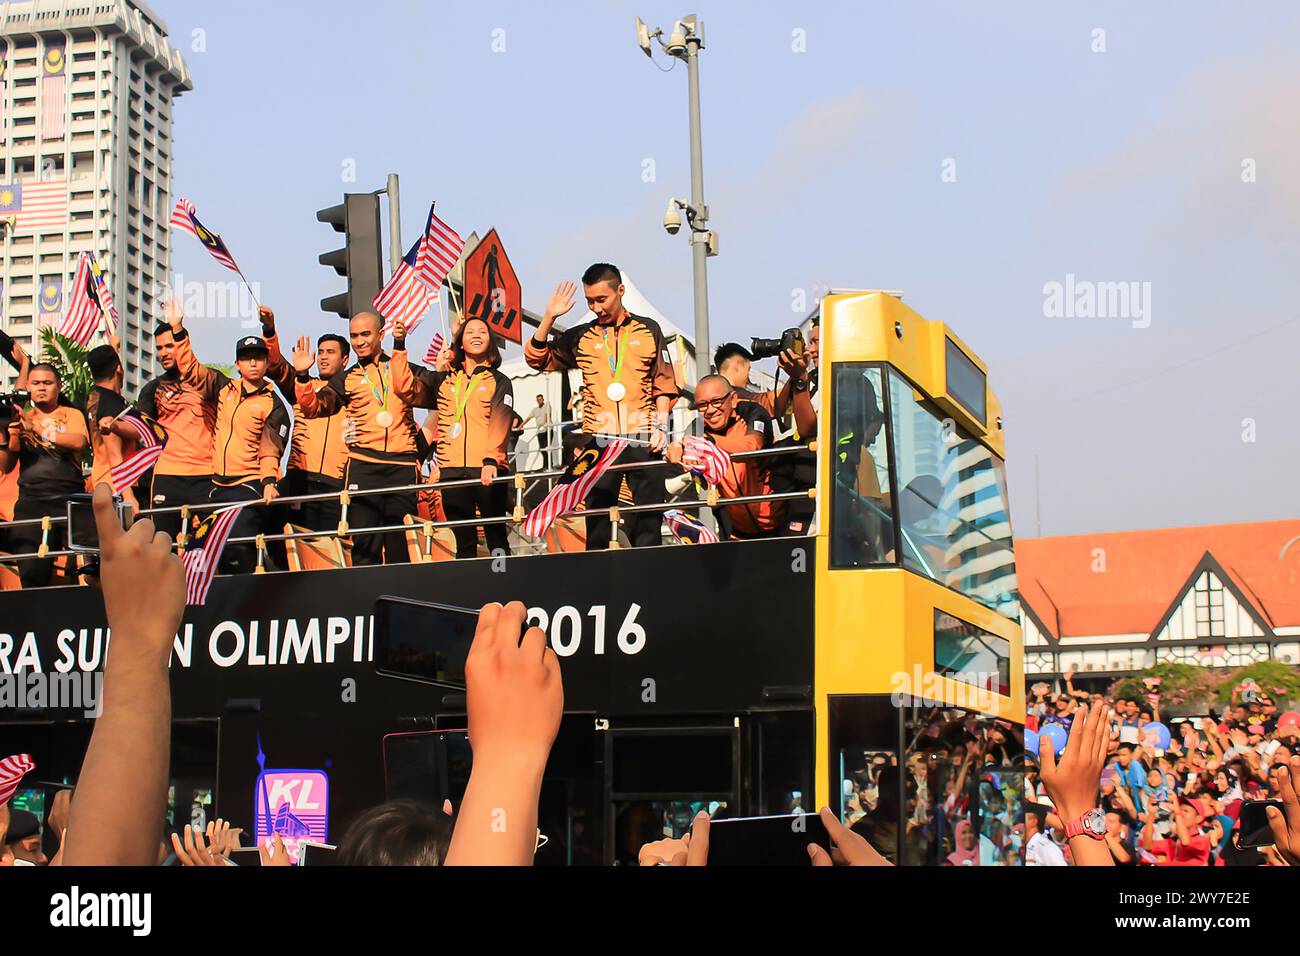 KUALA LUMPUR - AUGUST 31, 2017: A row of athletes on the bus consists of Lee Chong Wei, Pandelela Rinong and other during 60th Celebrations, Malaysian Stock Photo